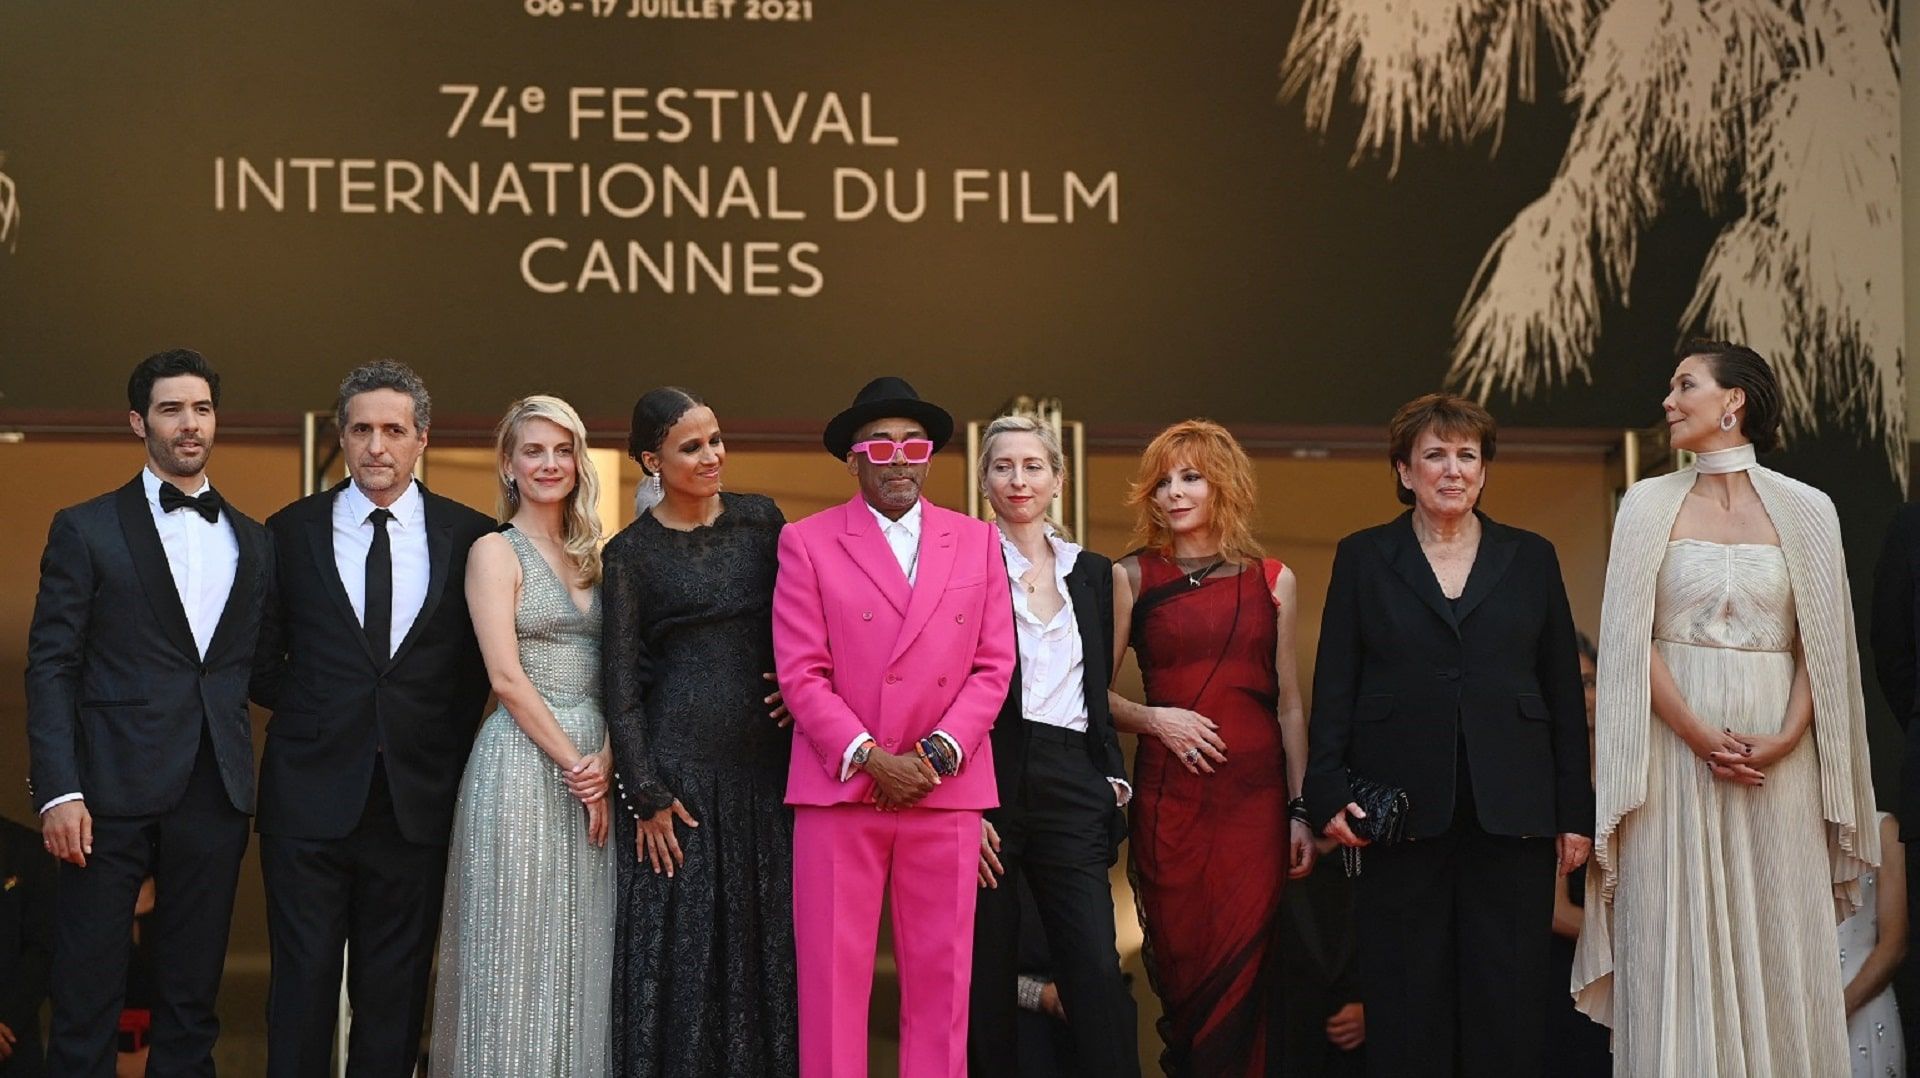 Cannes Film Festival 2021 Meet the five women on the jury panel